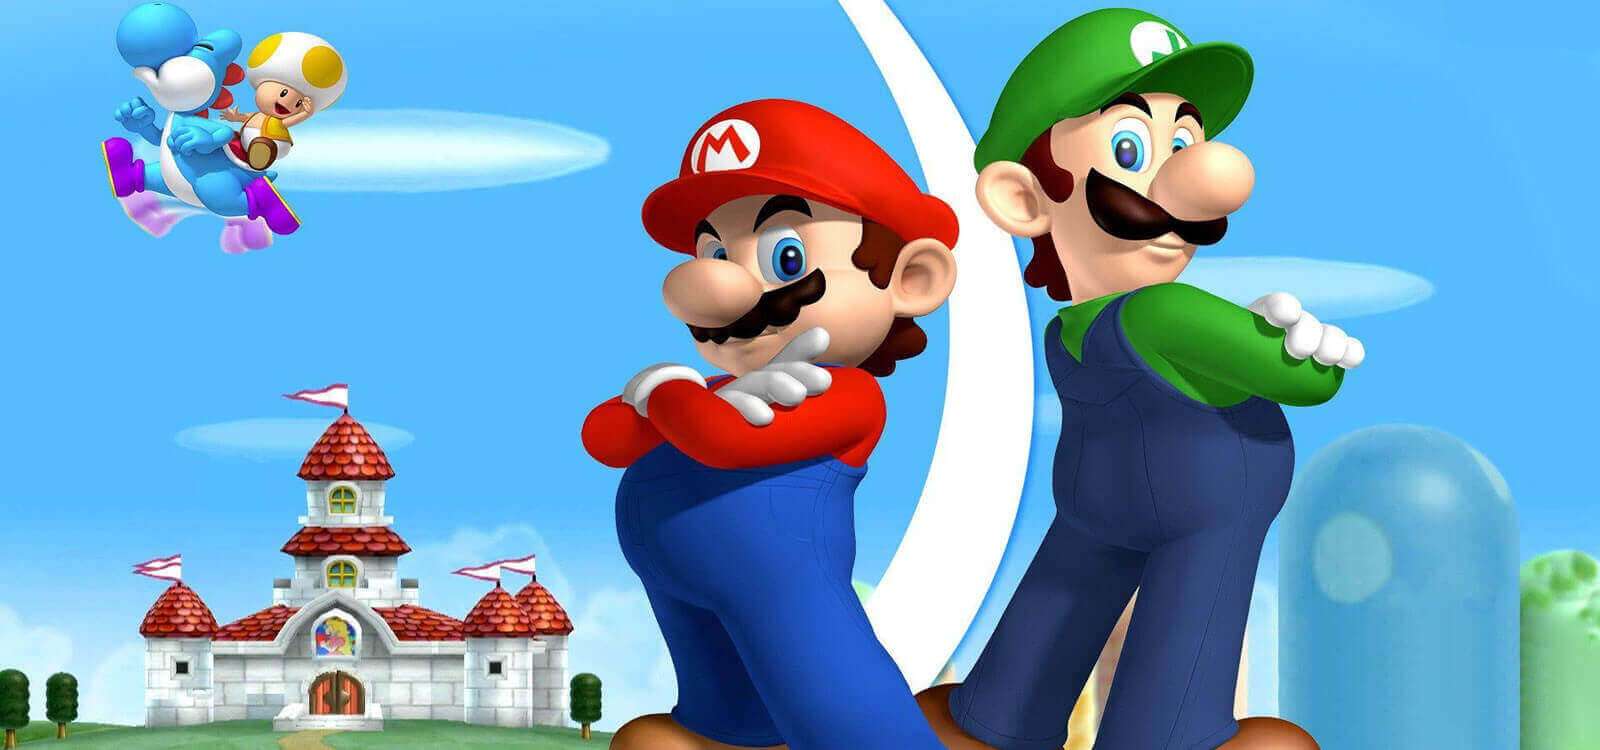 Play Our Online Mario and Luigi Free Flash Game.